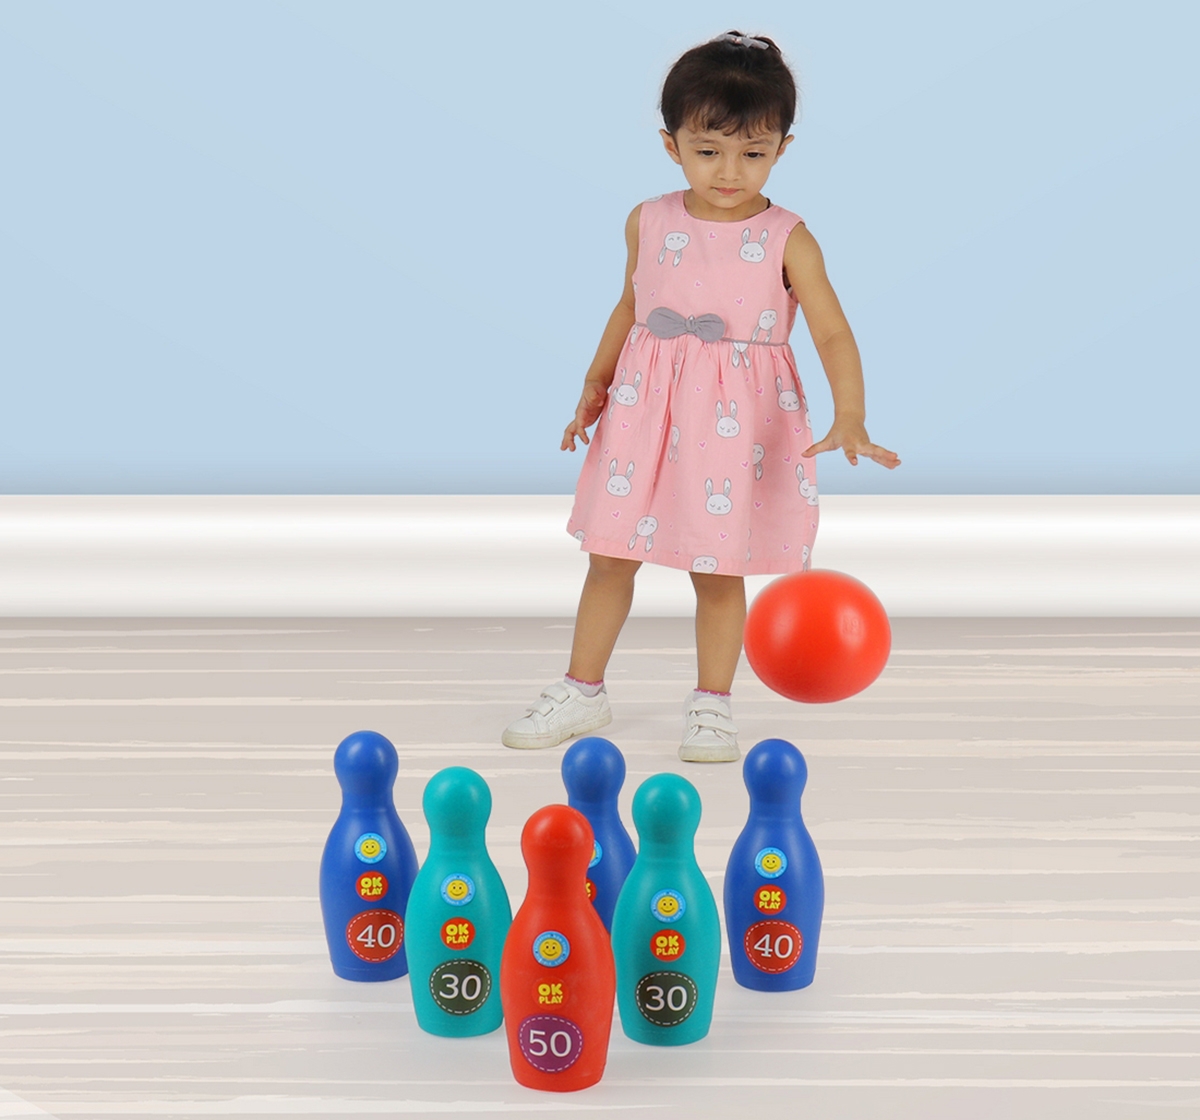 Zoozi Junior Bowling Alley Bowling Game Set for KidsPlastic Multicolor 3Y+